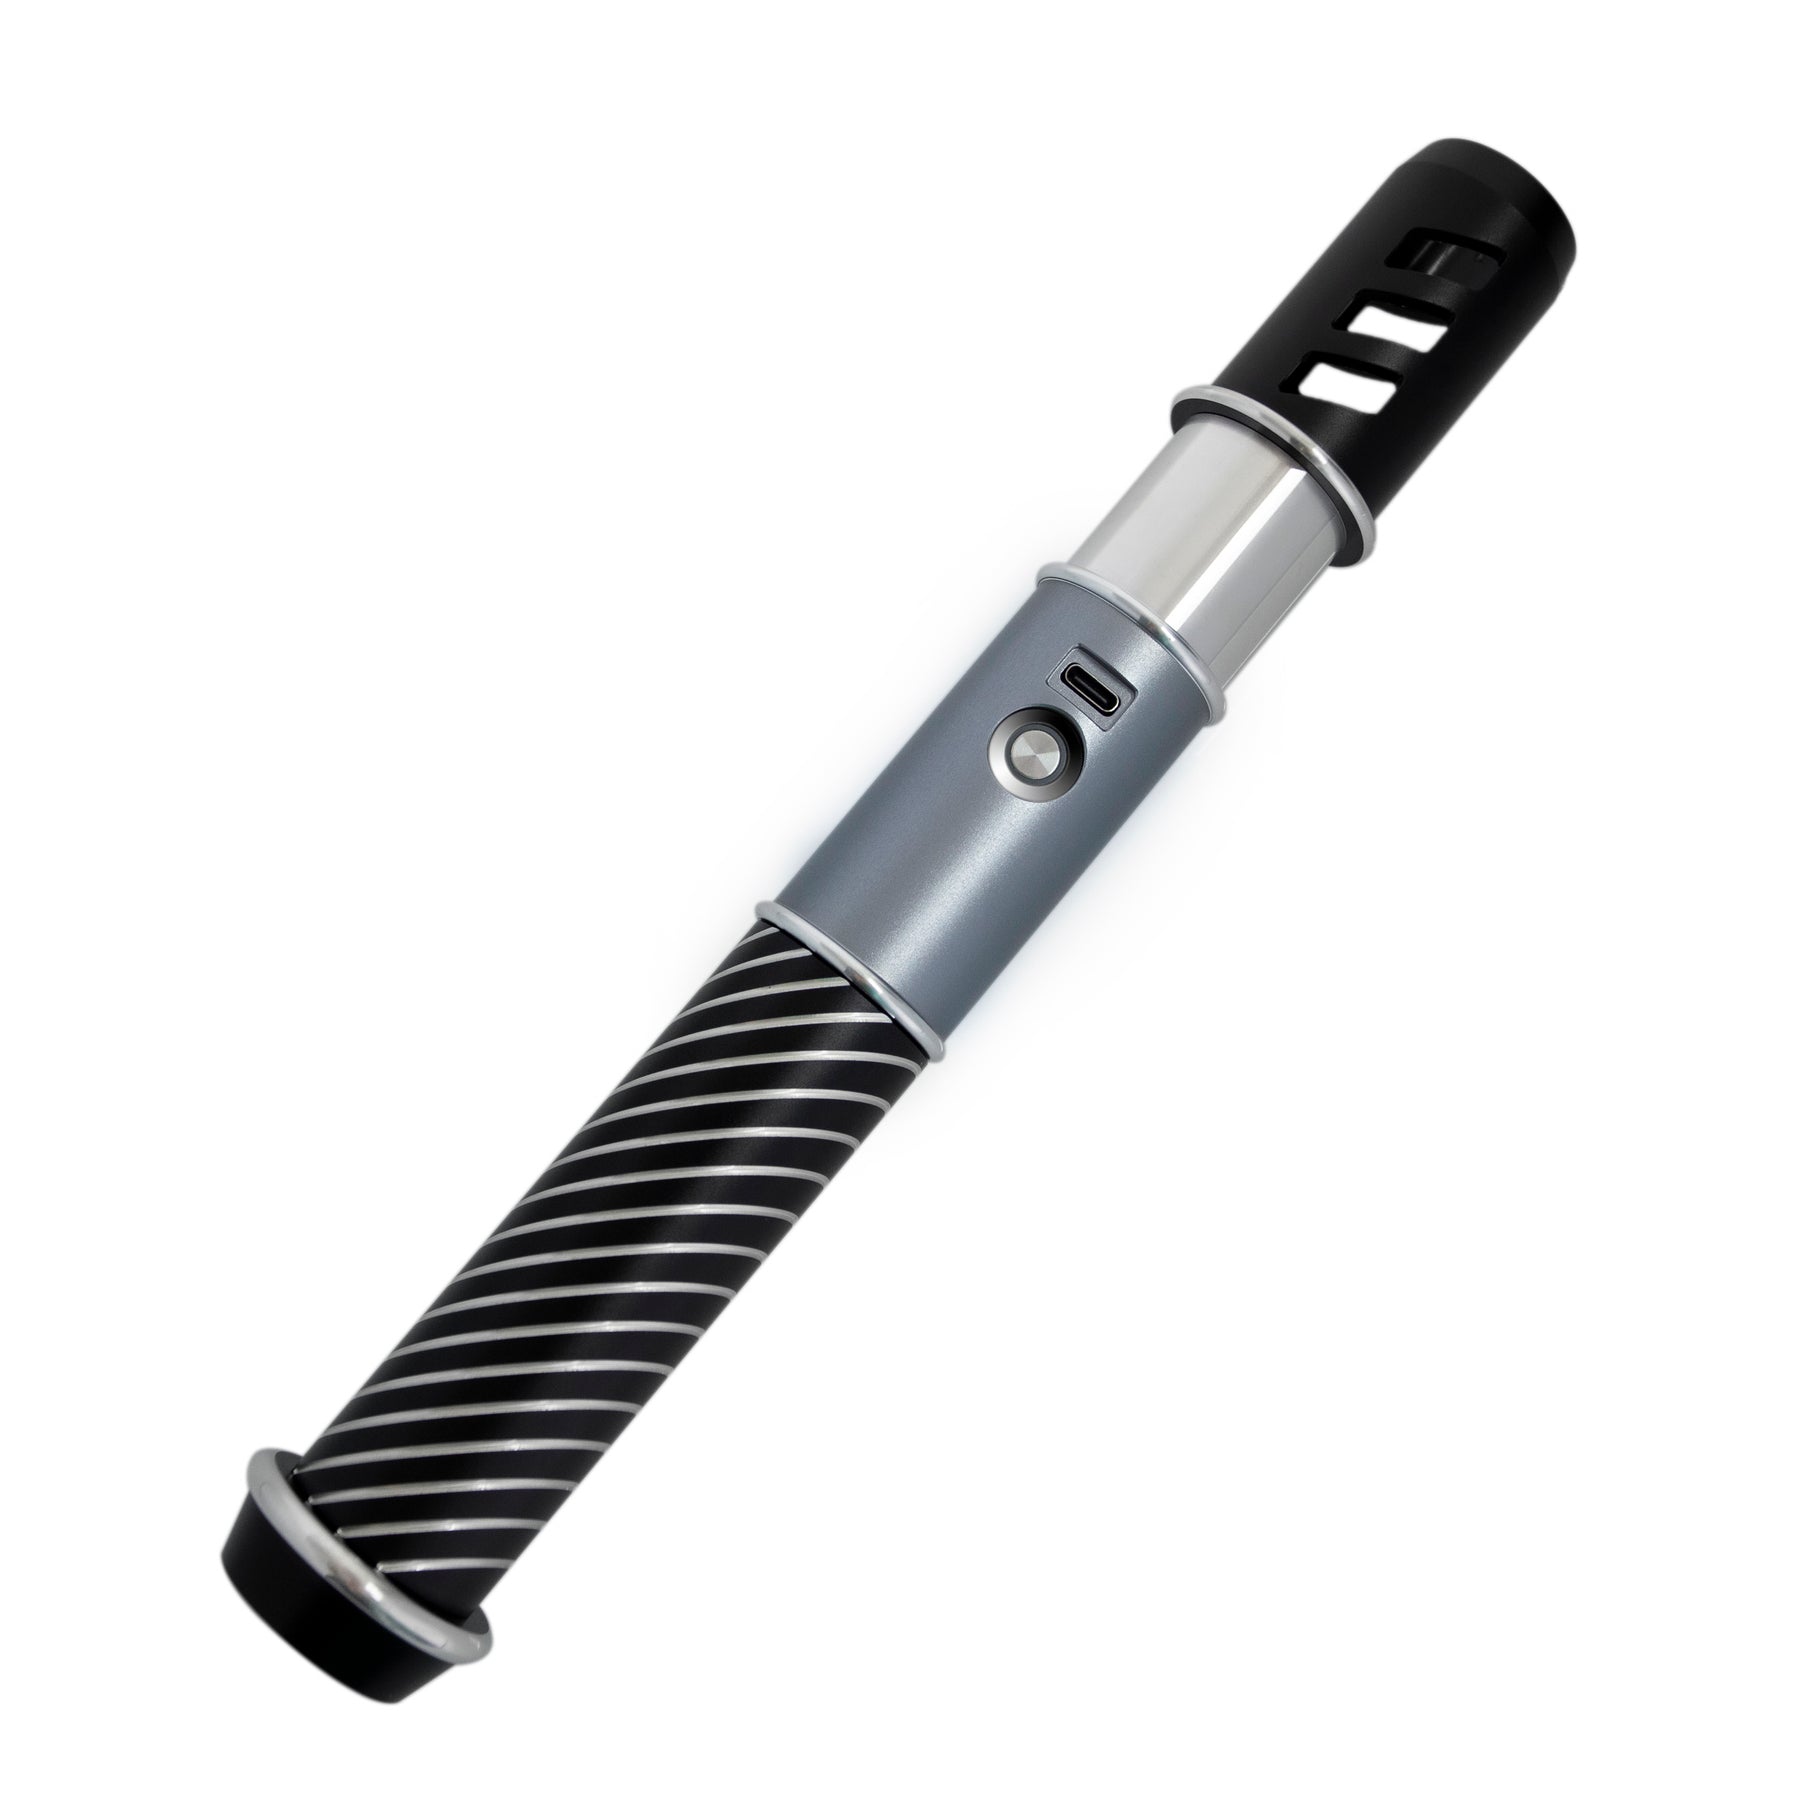 SaberCustom Dueling Bluetooth Lightsaber Neopixel 16 Sound Fonts Infinite Colors Changing with Shell HX006